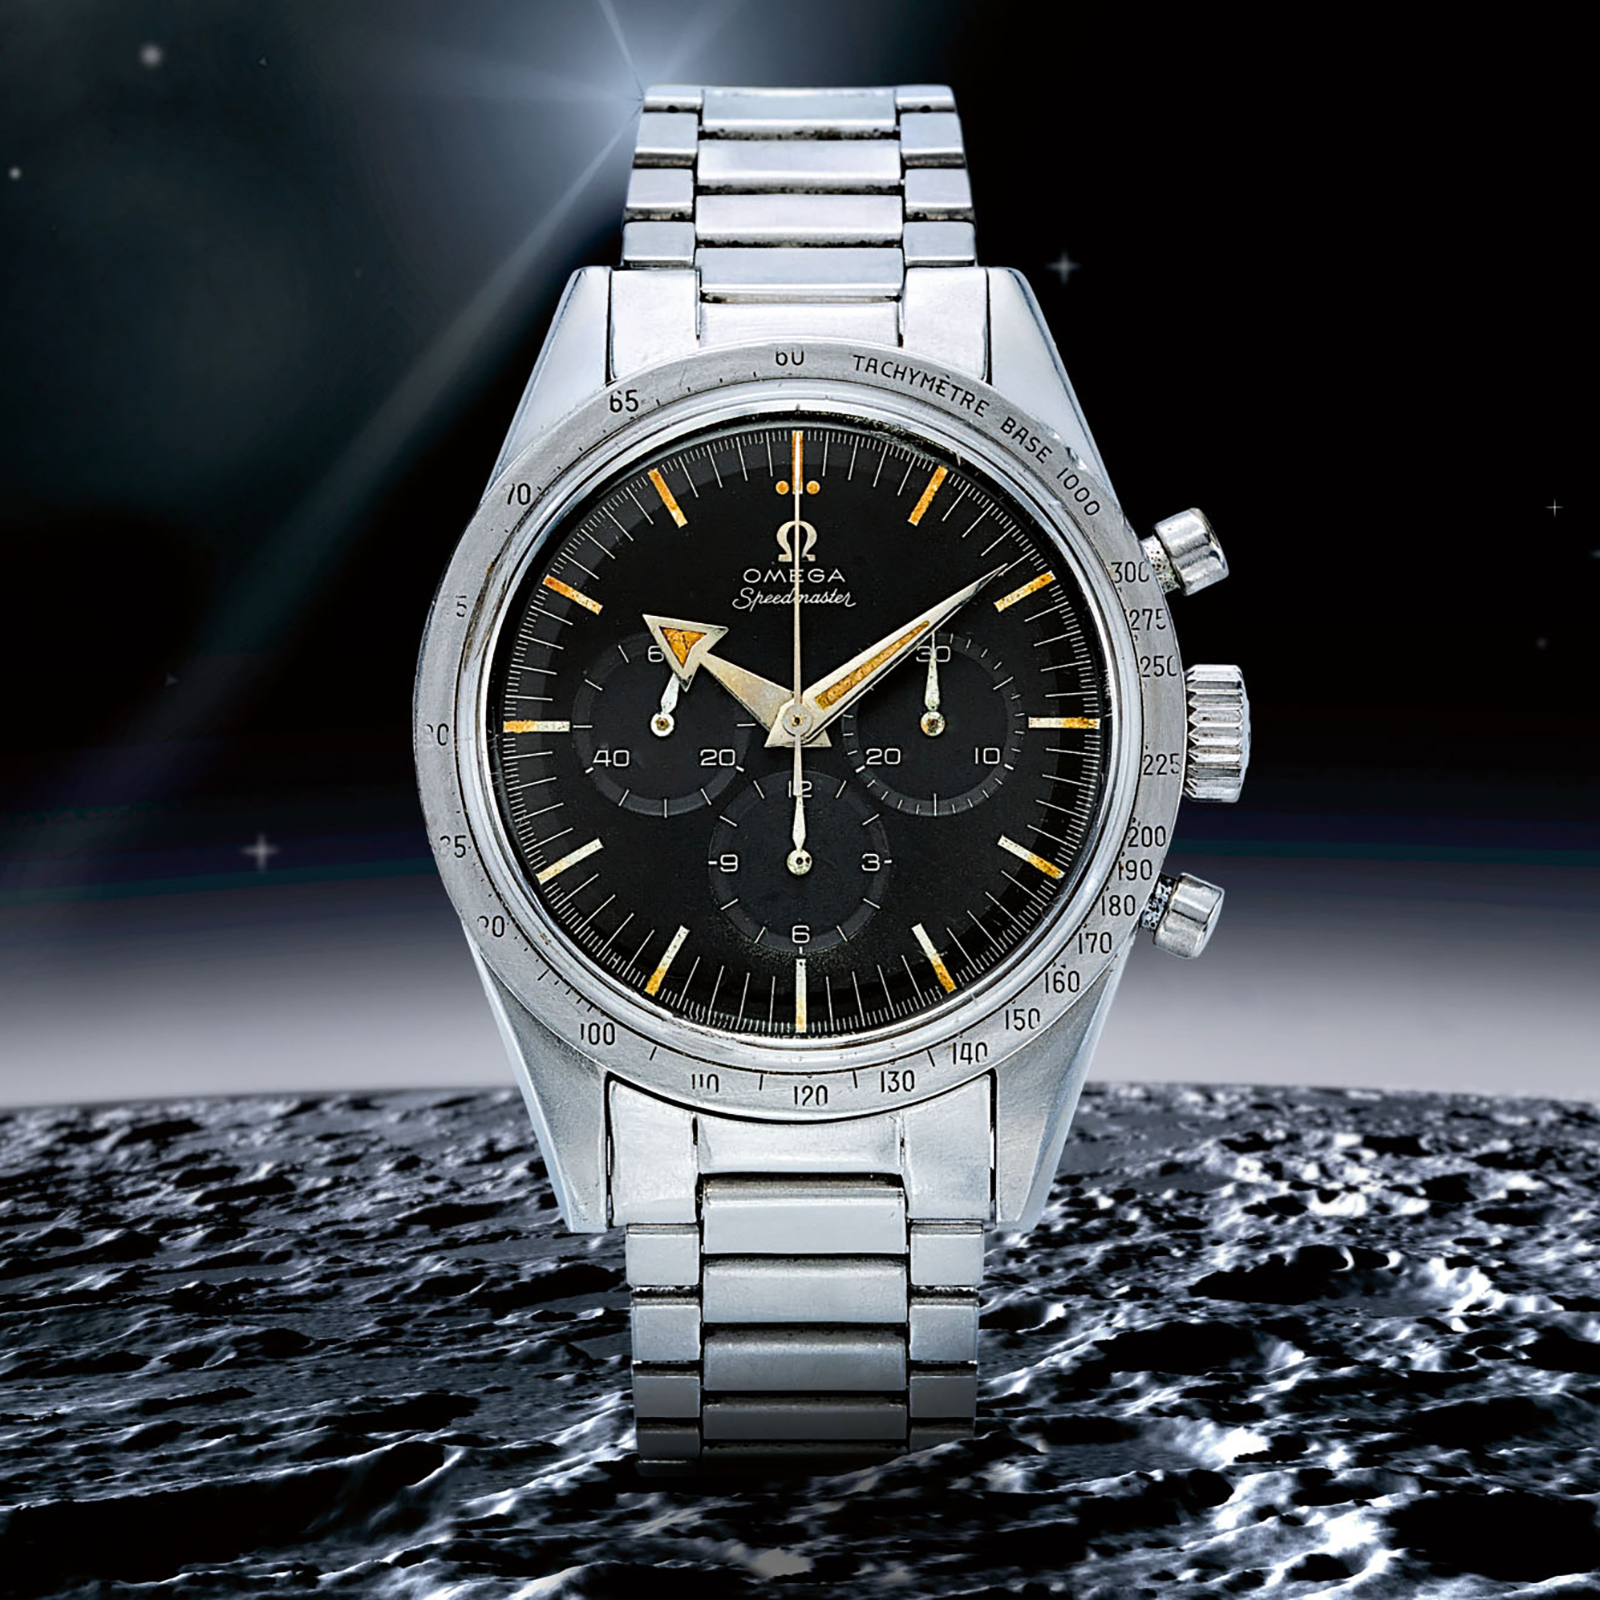 The Speedmaster ref. 2915-1 "Broad Arrow" with a tachymeter on the bezel. Photo - Sotheby's